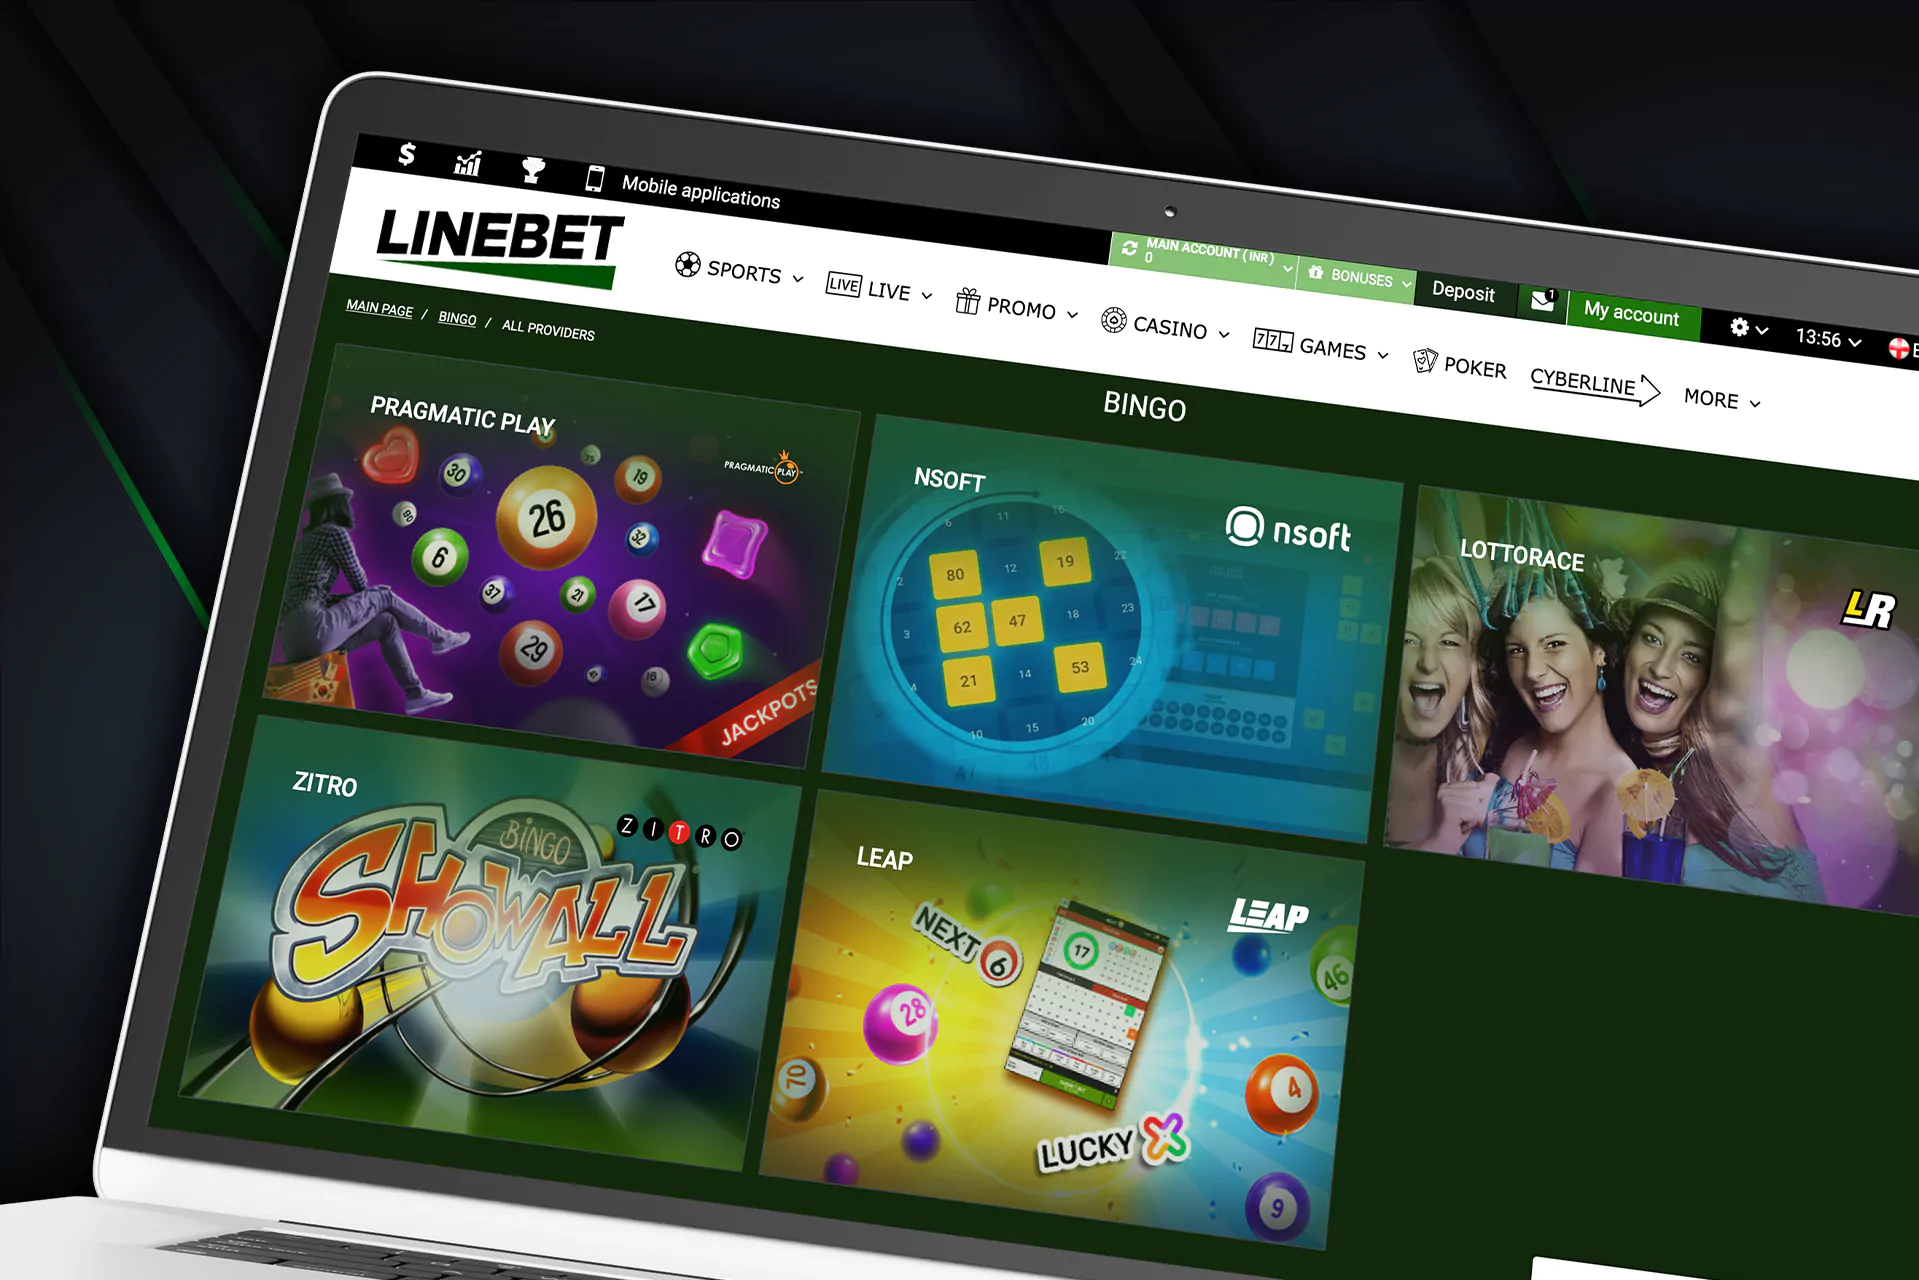 There are also bingo games in the Linebet casino.